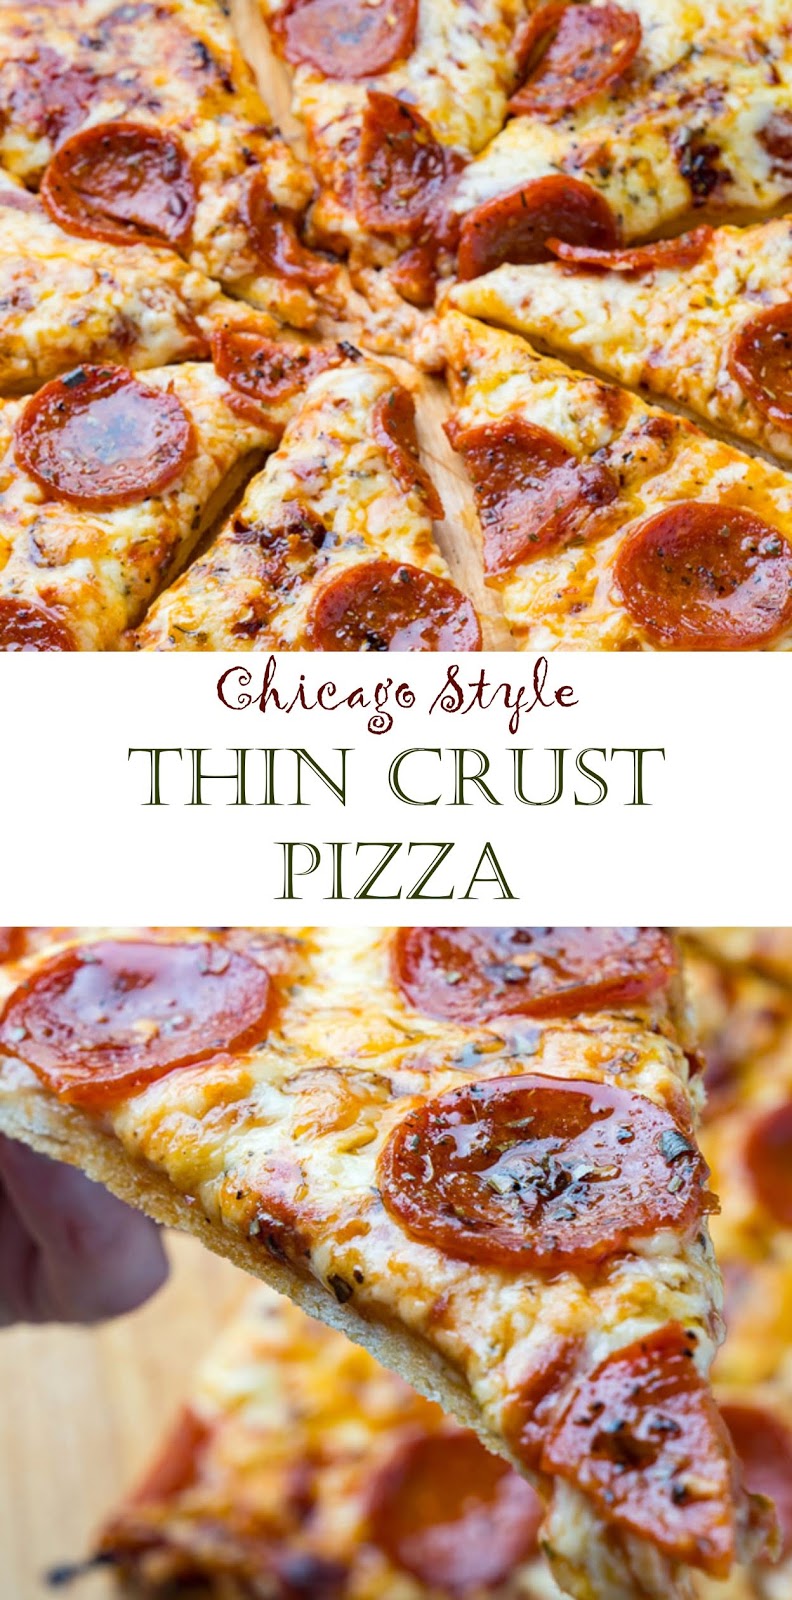 1759 Reviews: My BEST #Recipes >> Chicago Style Thin Crust #Pizza - .....